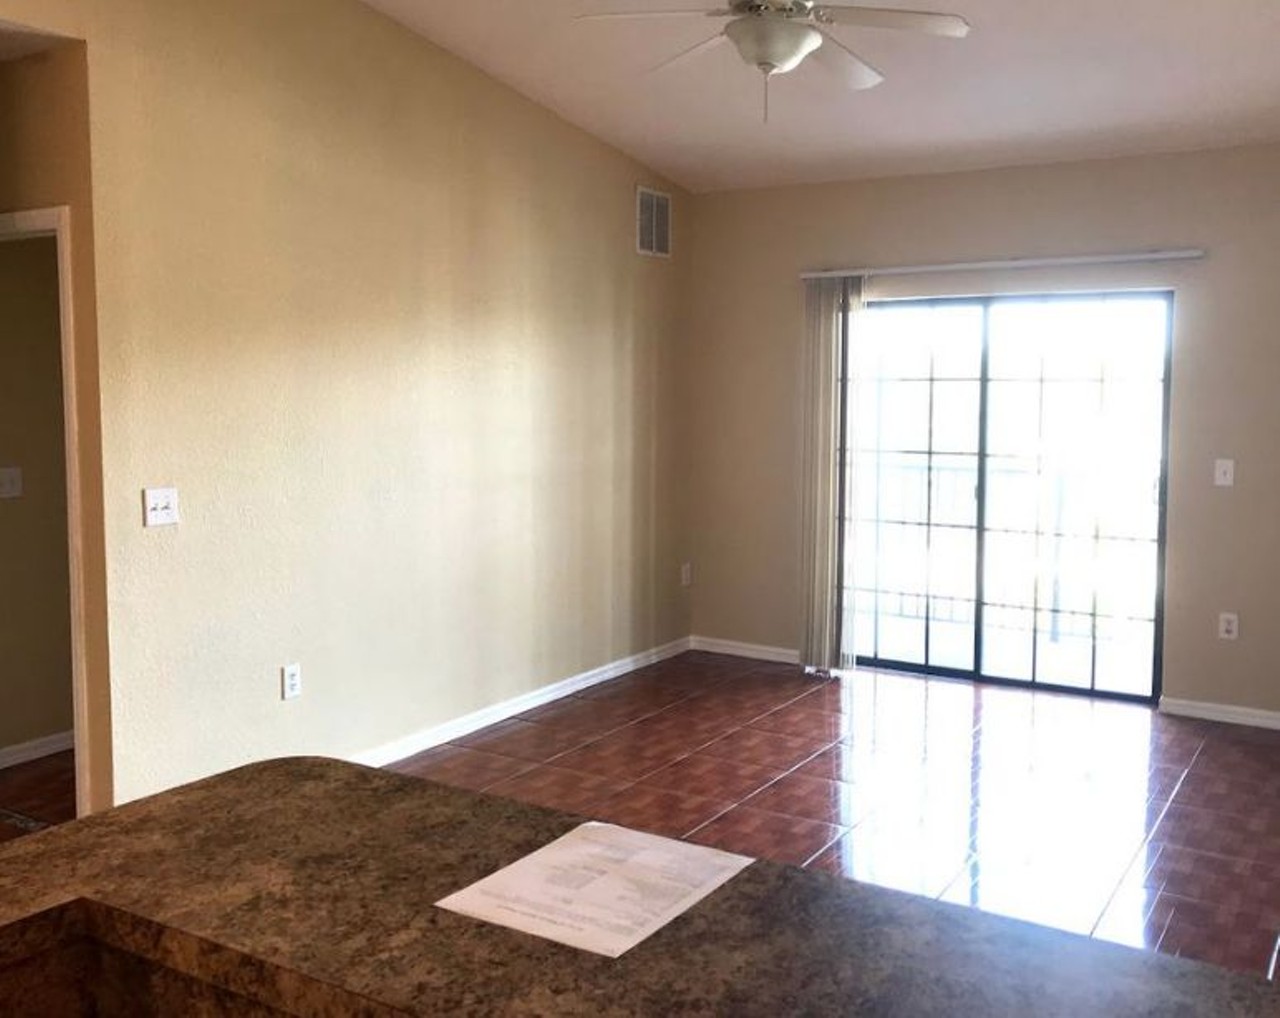 9910 Turf Way, Orlando
$1,225/mo
2 bed, 2 bath, 905 sqft
There is a ton of light that comes in through the sliding glass window that will walk you right out to all the outdoor activities supplied at this complex.